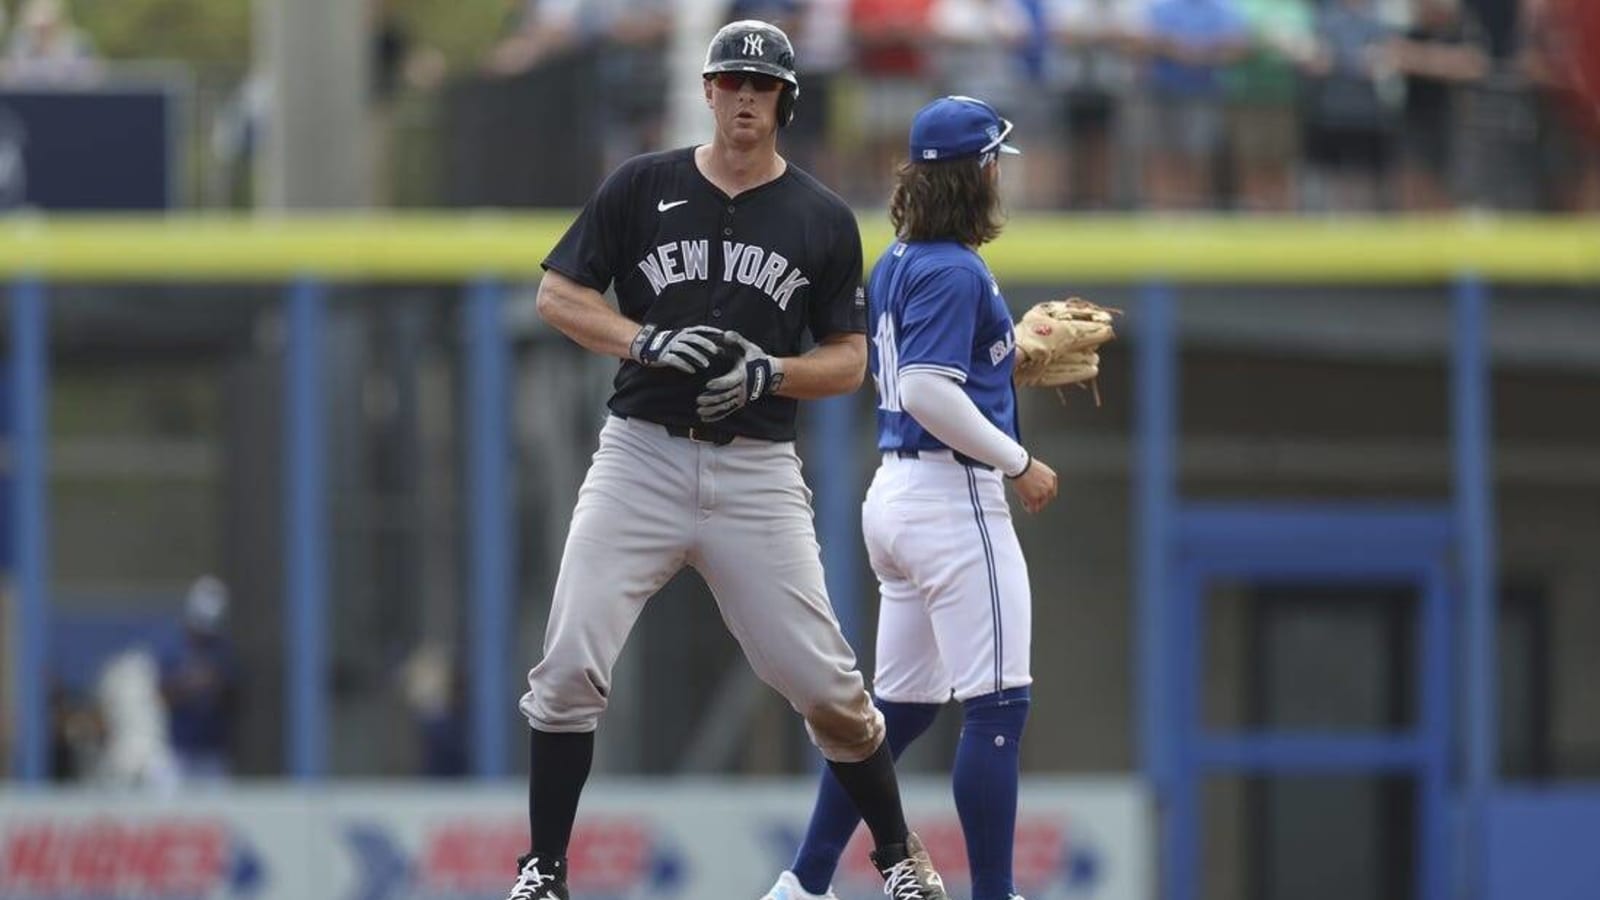 Yankees to rest 3B DJ LeMahieu for bruised right foot